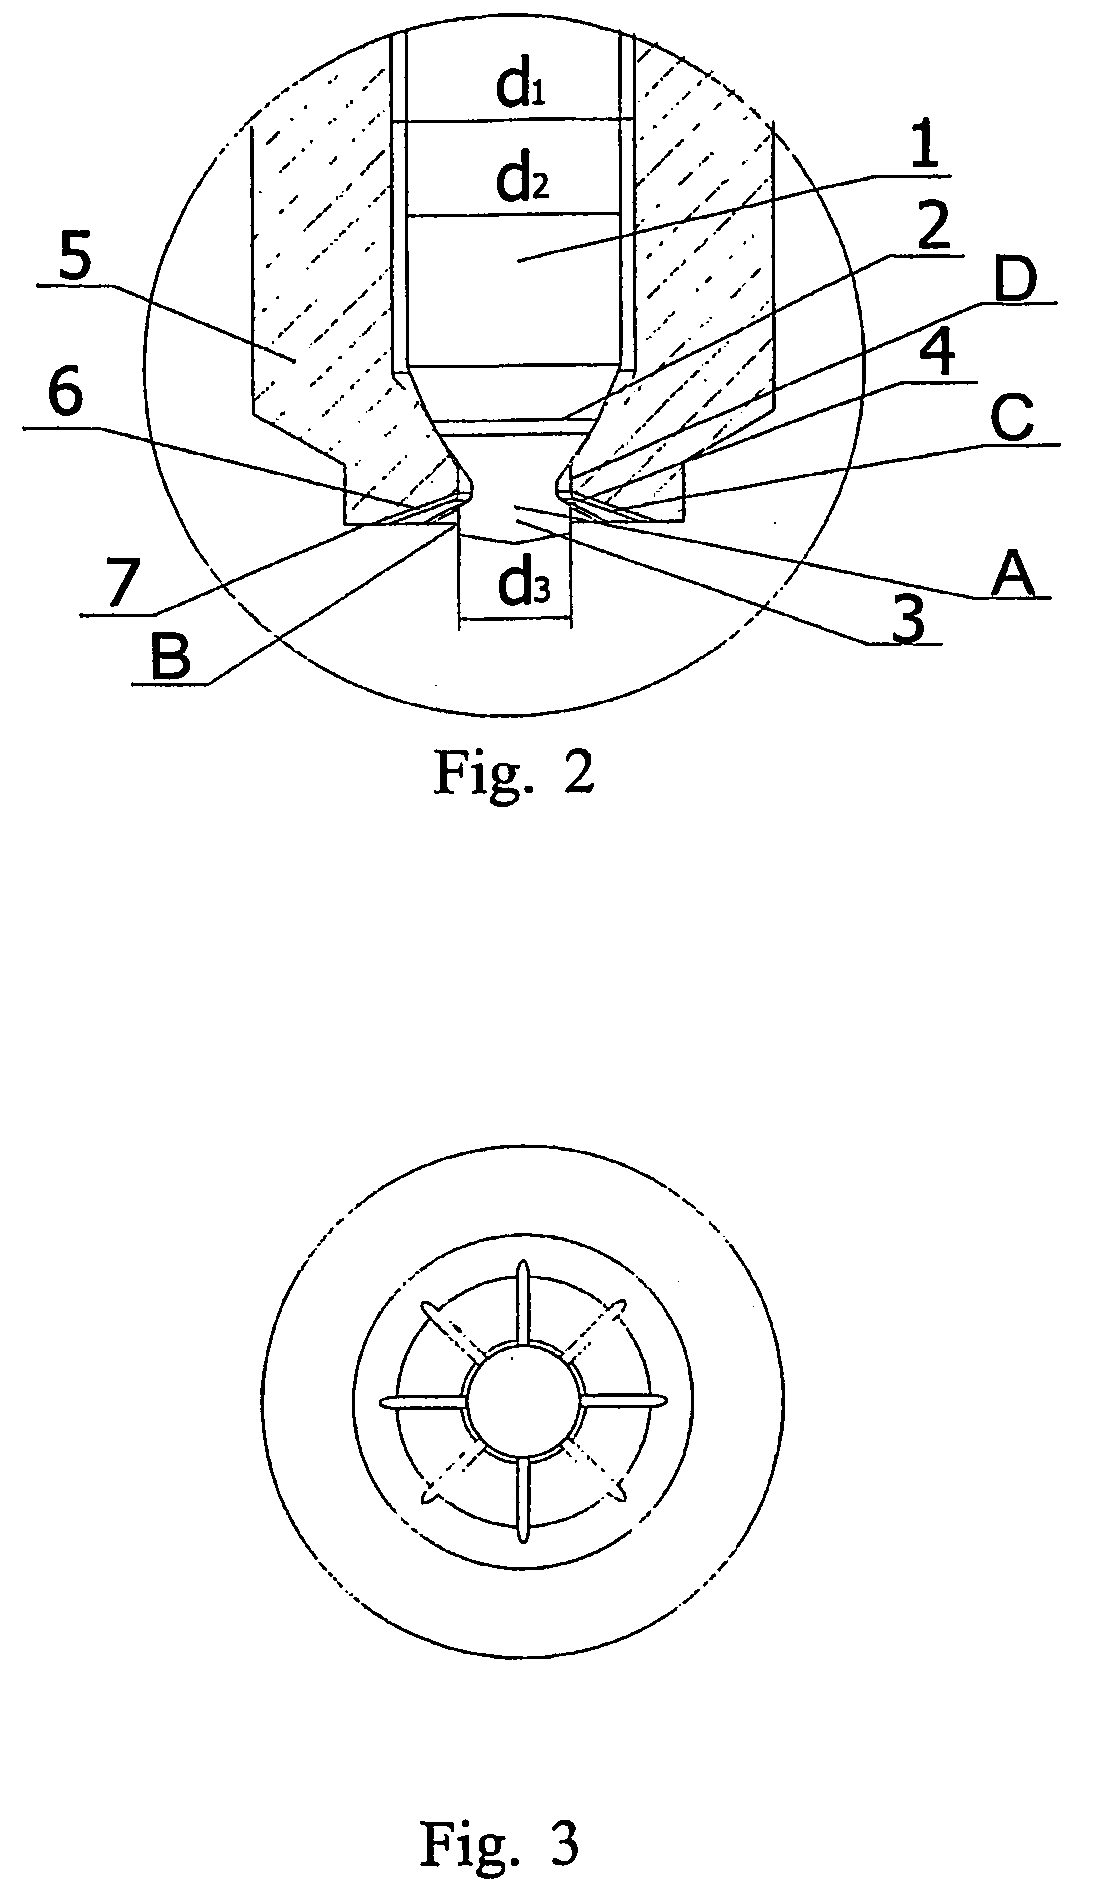 Mixed-Mode Fuel Injector with a Variable Orifice